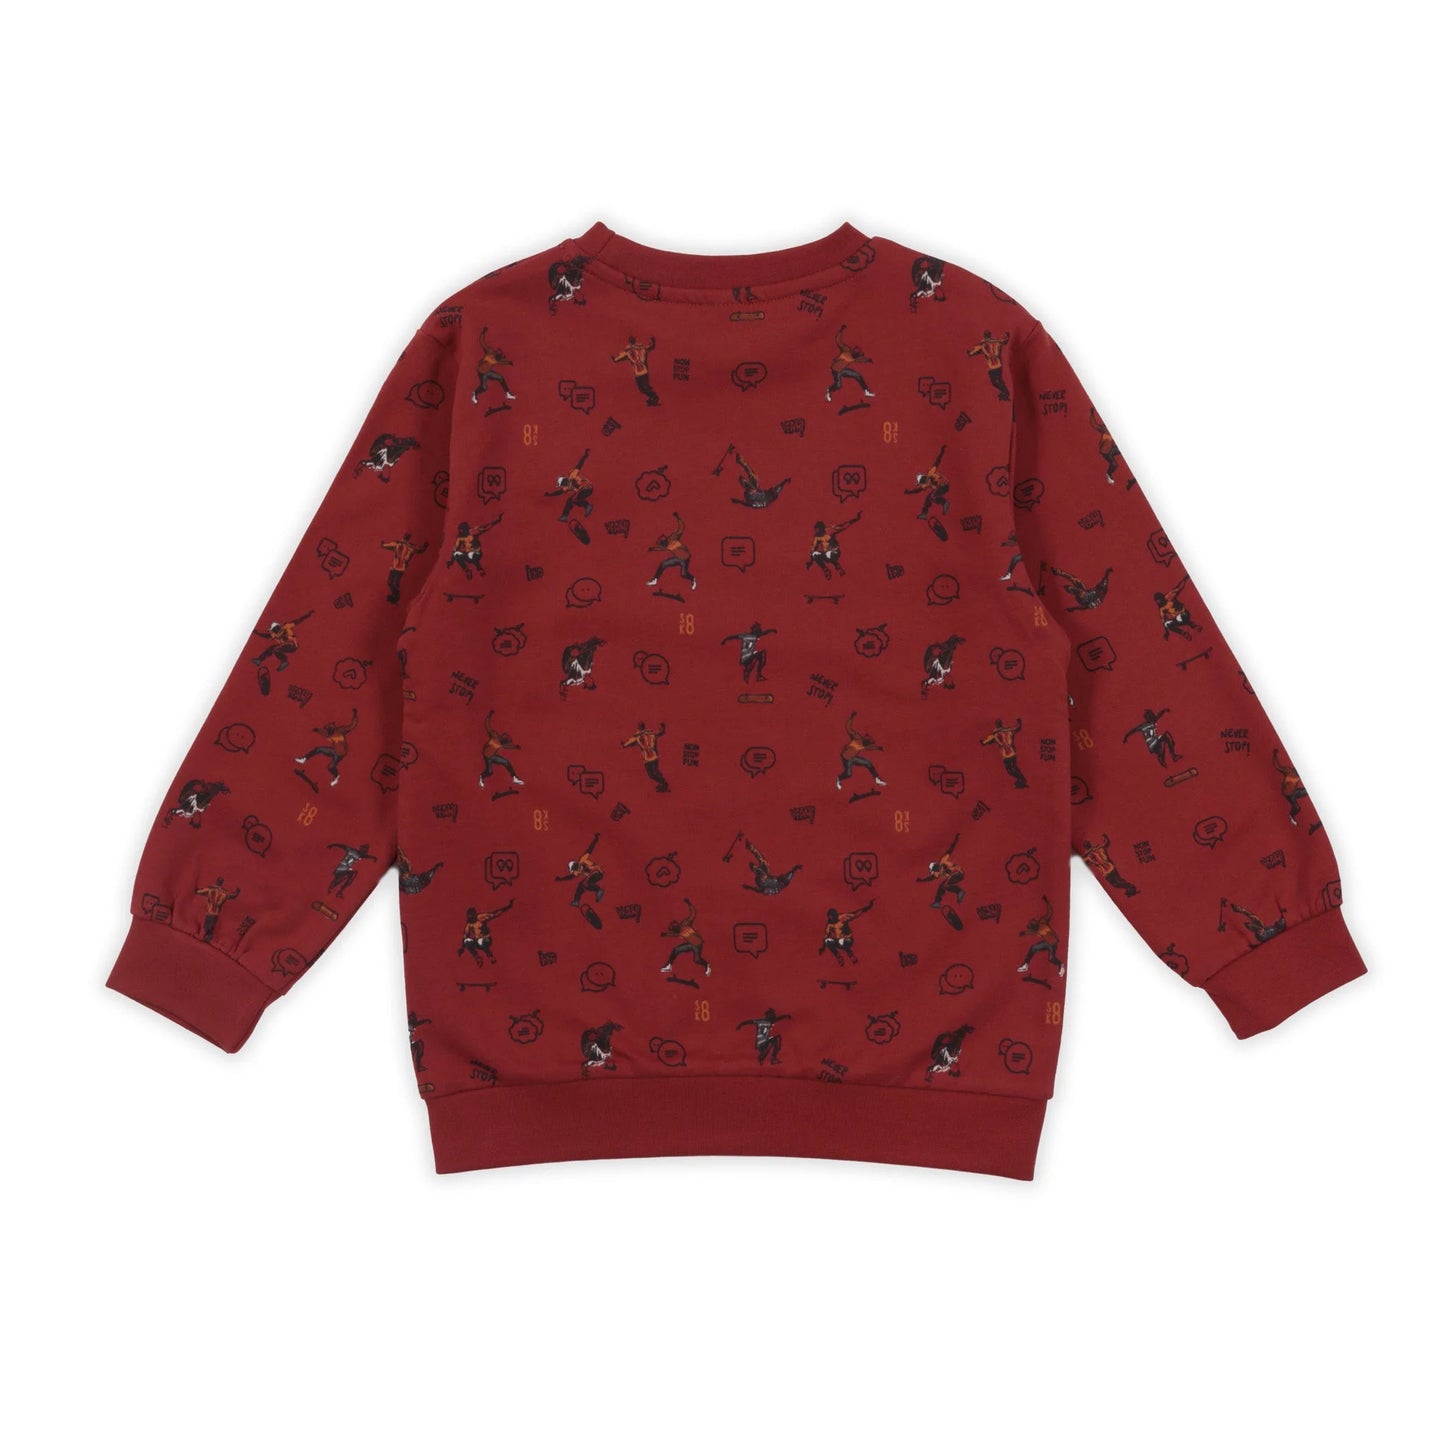 Red Nanö sweater for boys 2 to 6 years